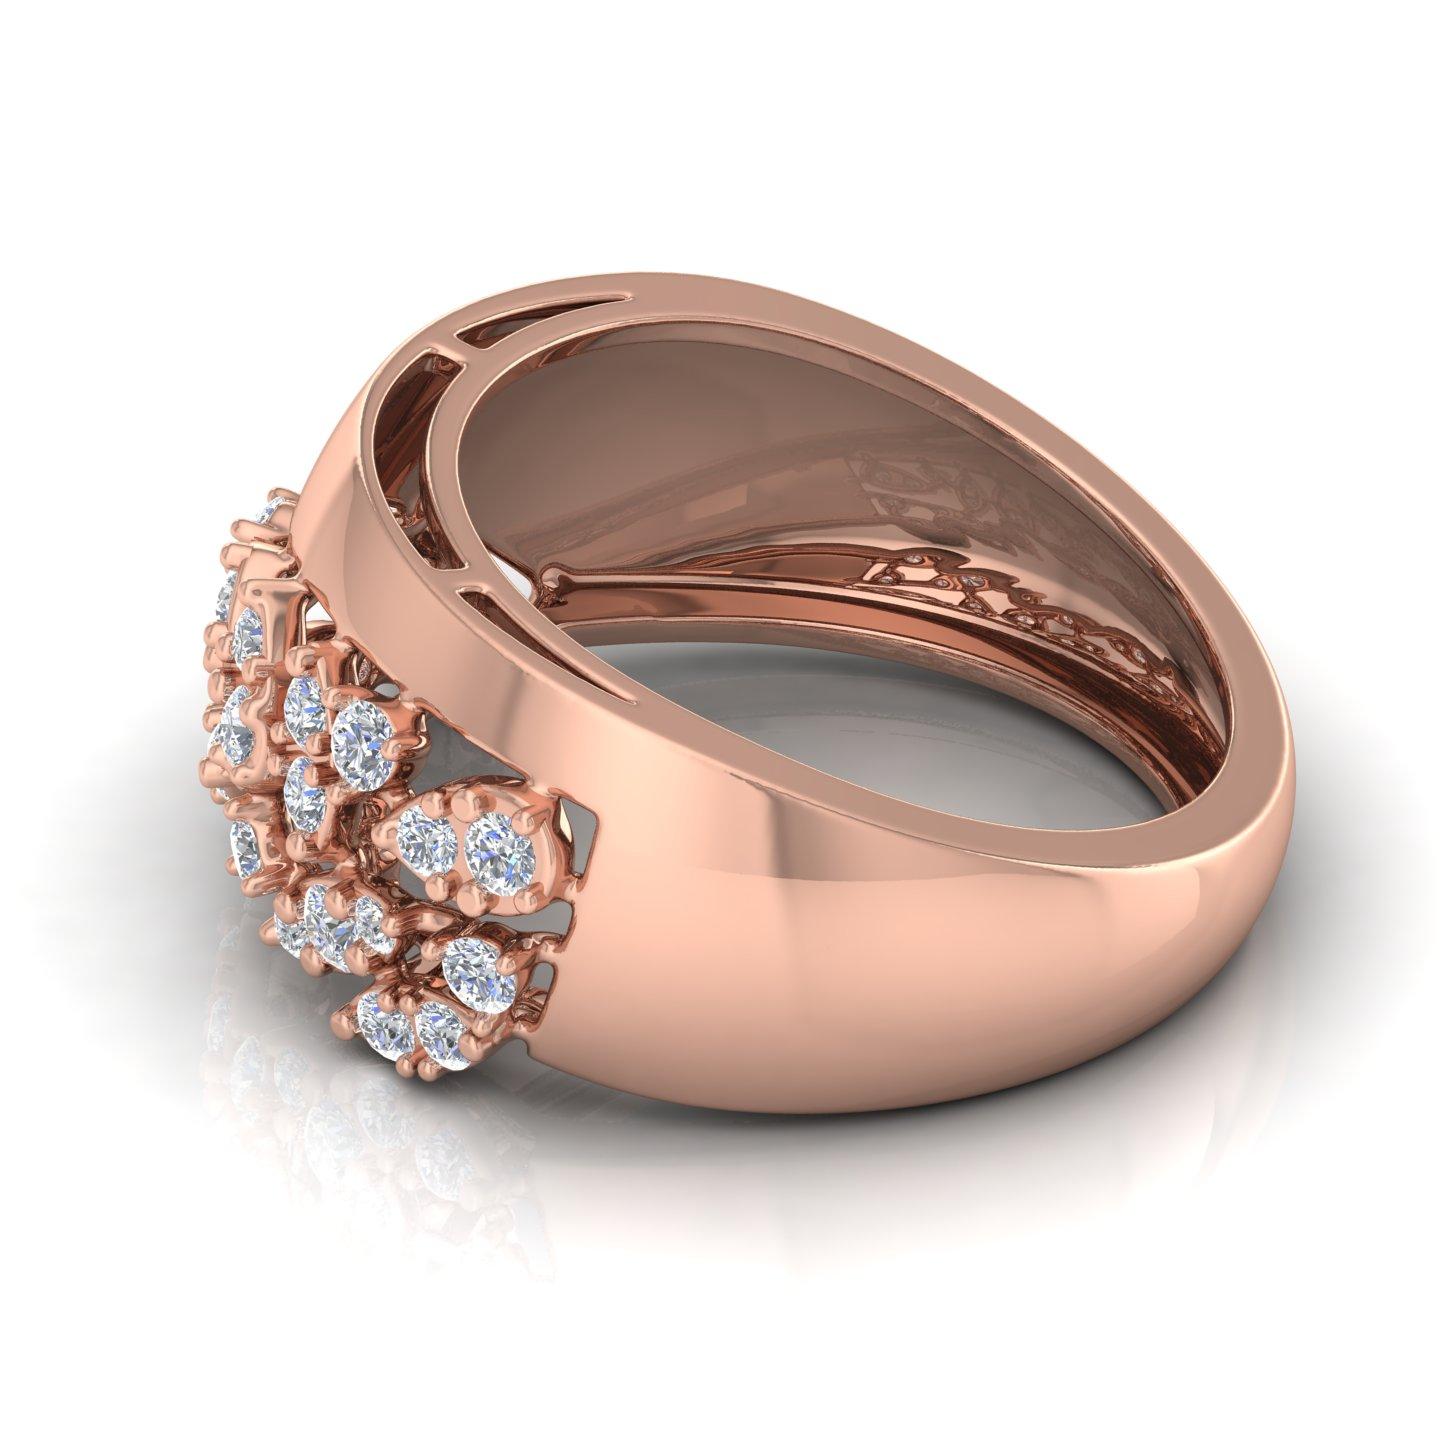 Item Code :- SER-2006
Gross Wt. :- 3.63 gm
18k Rose Gold Wt. :- 3.53 gm
Diamond Wt. :- 0.50 Ct. ( AVERAGE DIAMOND CLARITY SI1-SI2 & COLOR H-I )
Ring Size :- 7 US & All size available

✦ Sizing
.....................
We can adjust most items to fit